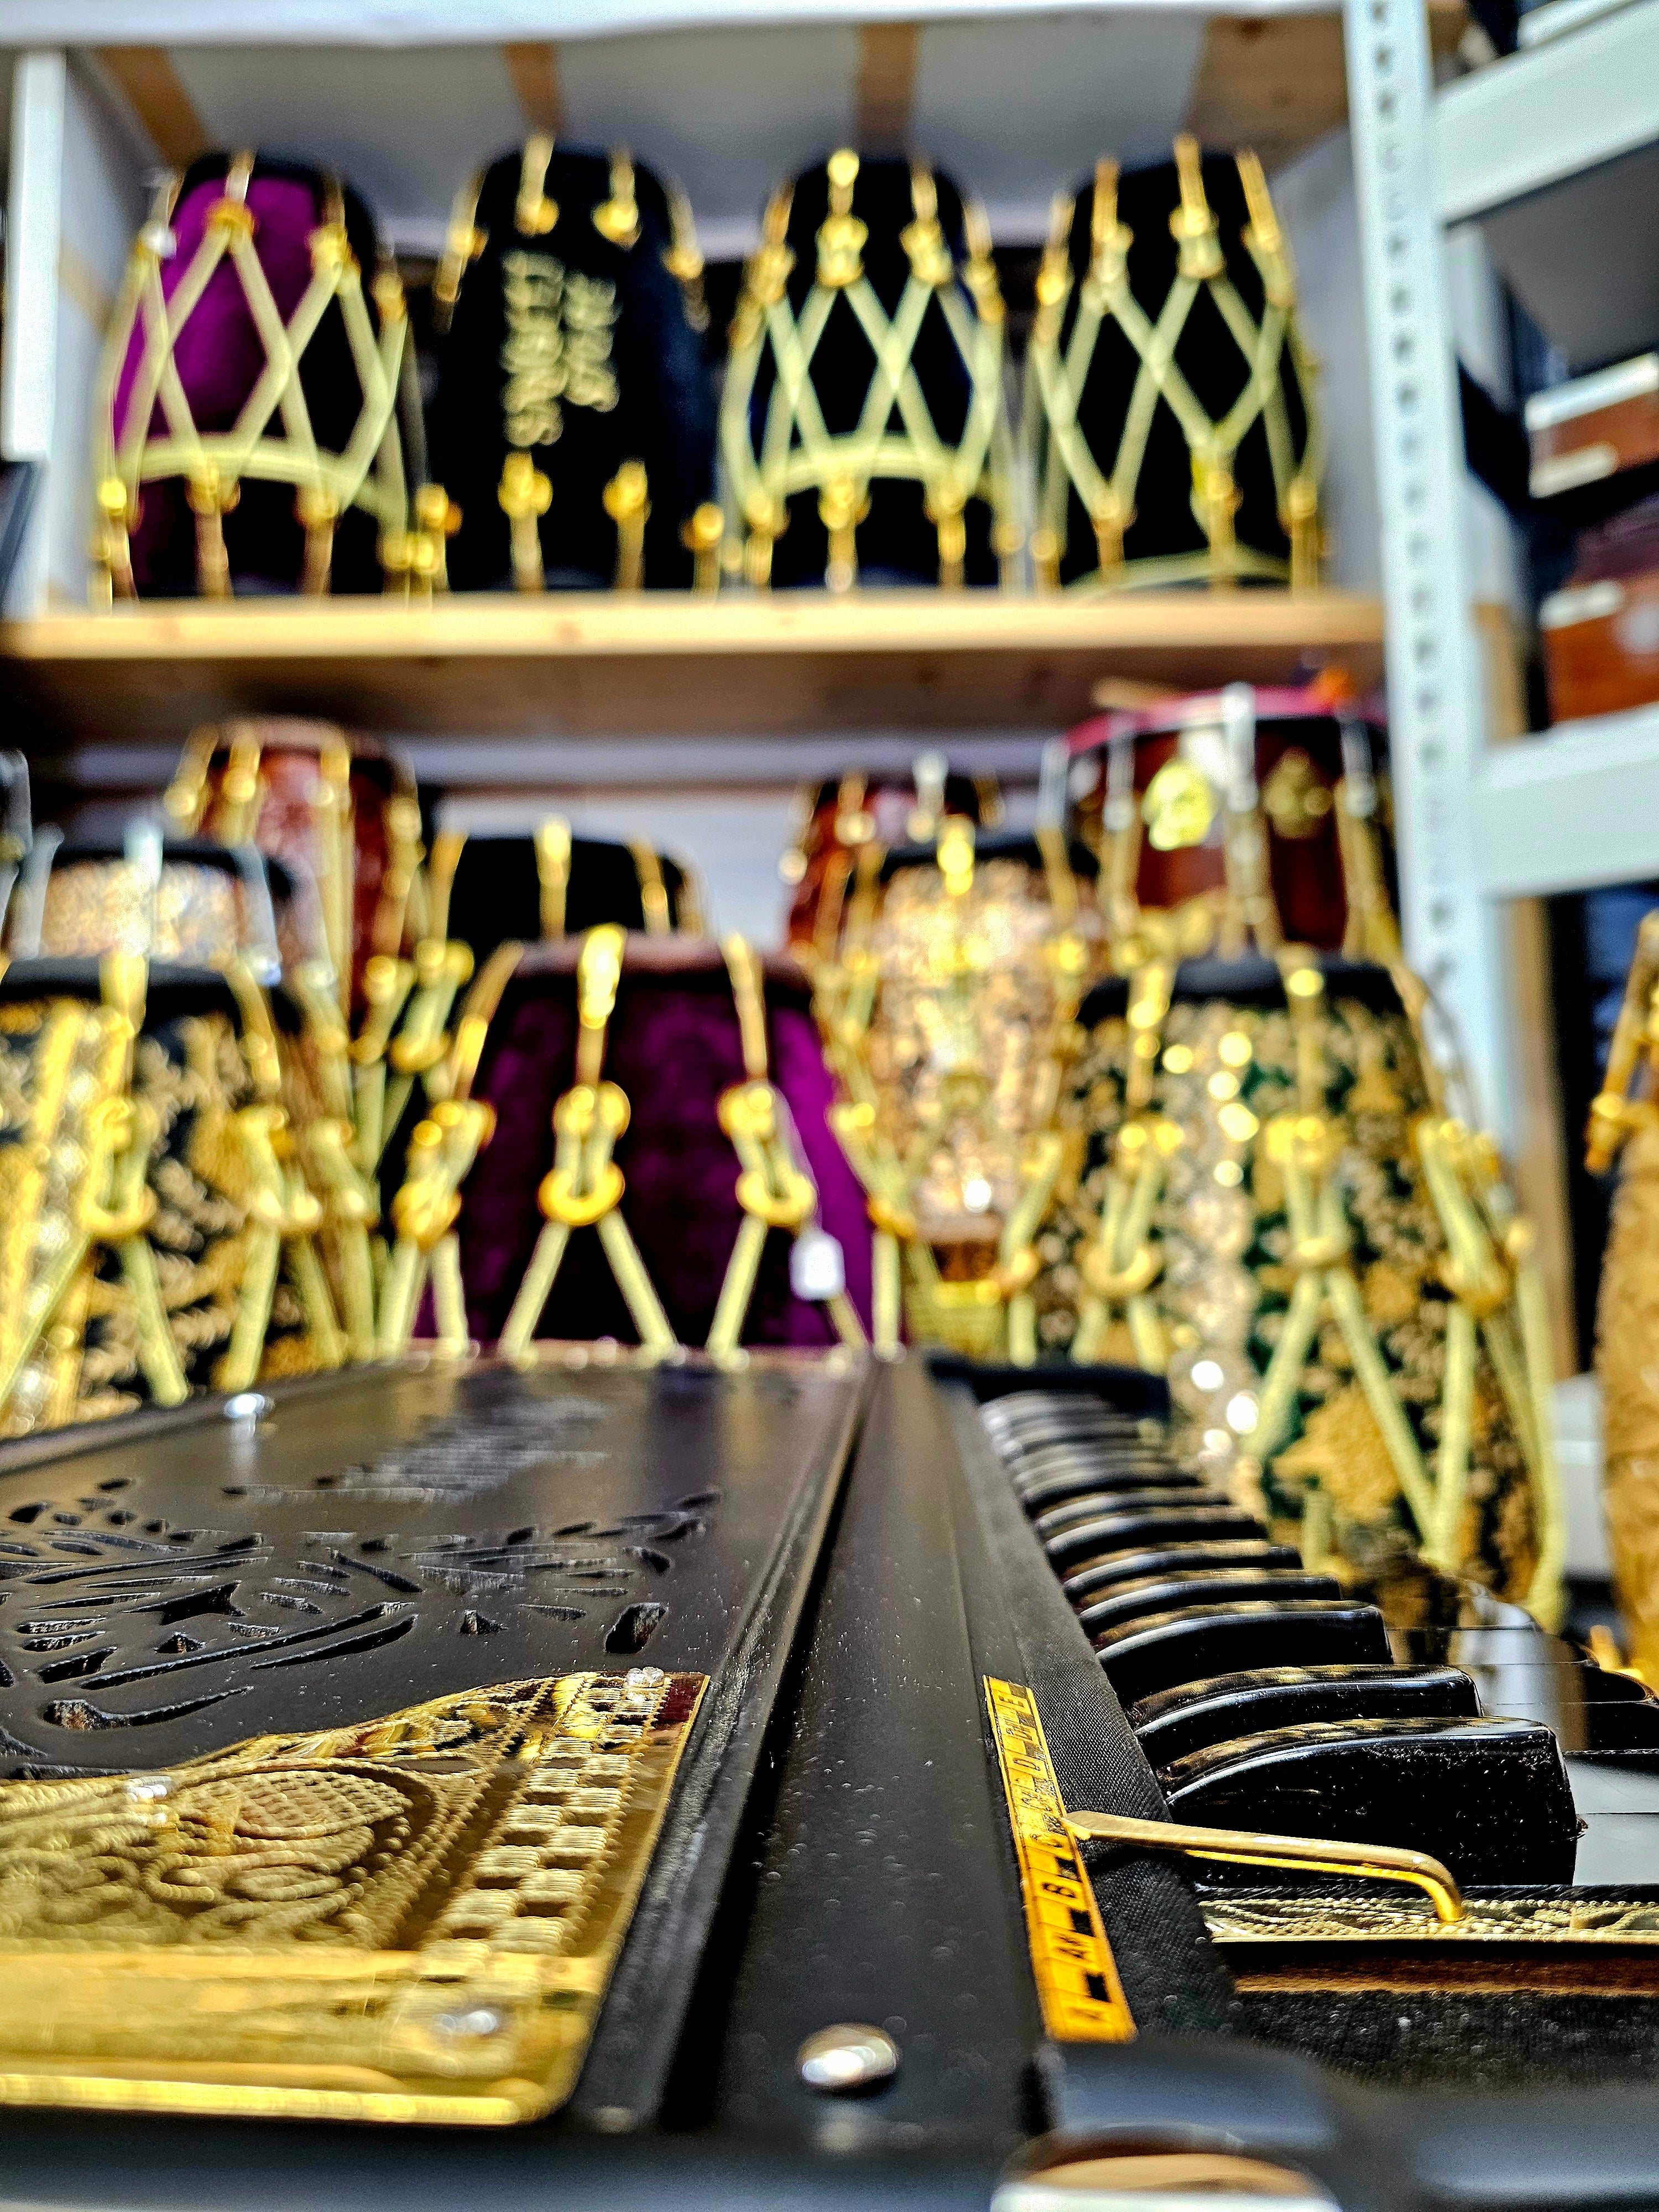 Harmony Noir Elegance: Matte Black 3 Reed BMF 9 Scale-Changer Sangeet Store Harmonium with Black-on-Black Keys and Golden Accents